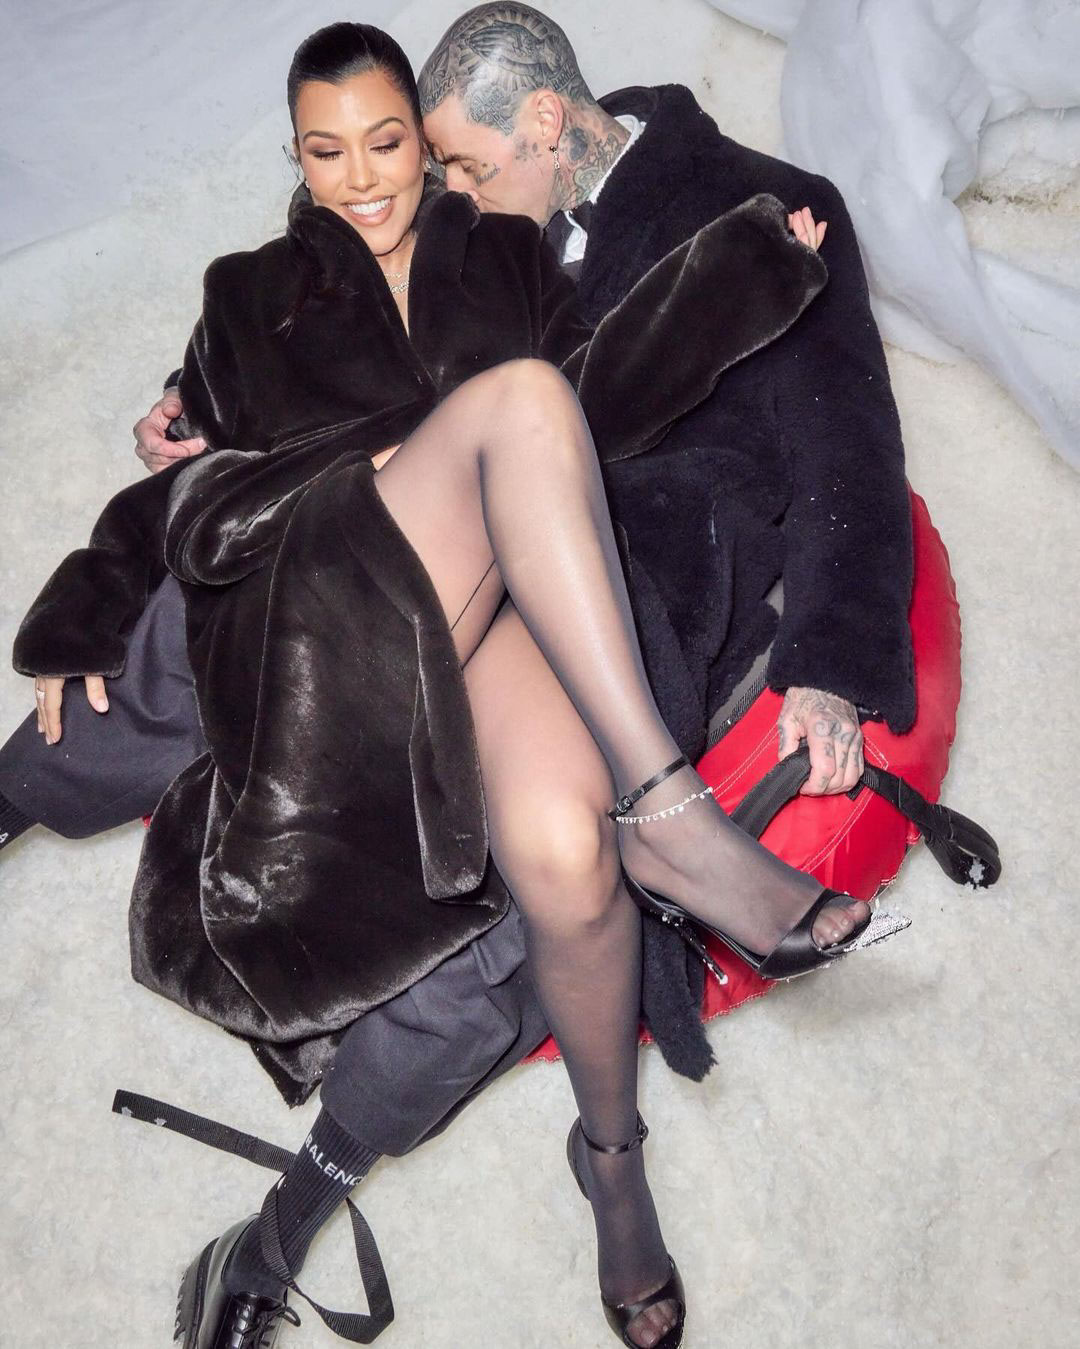 The couple was posing at the Kardashians' annual Christmas Eve party